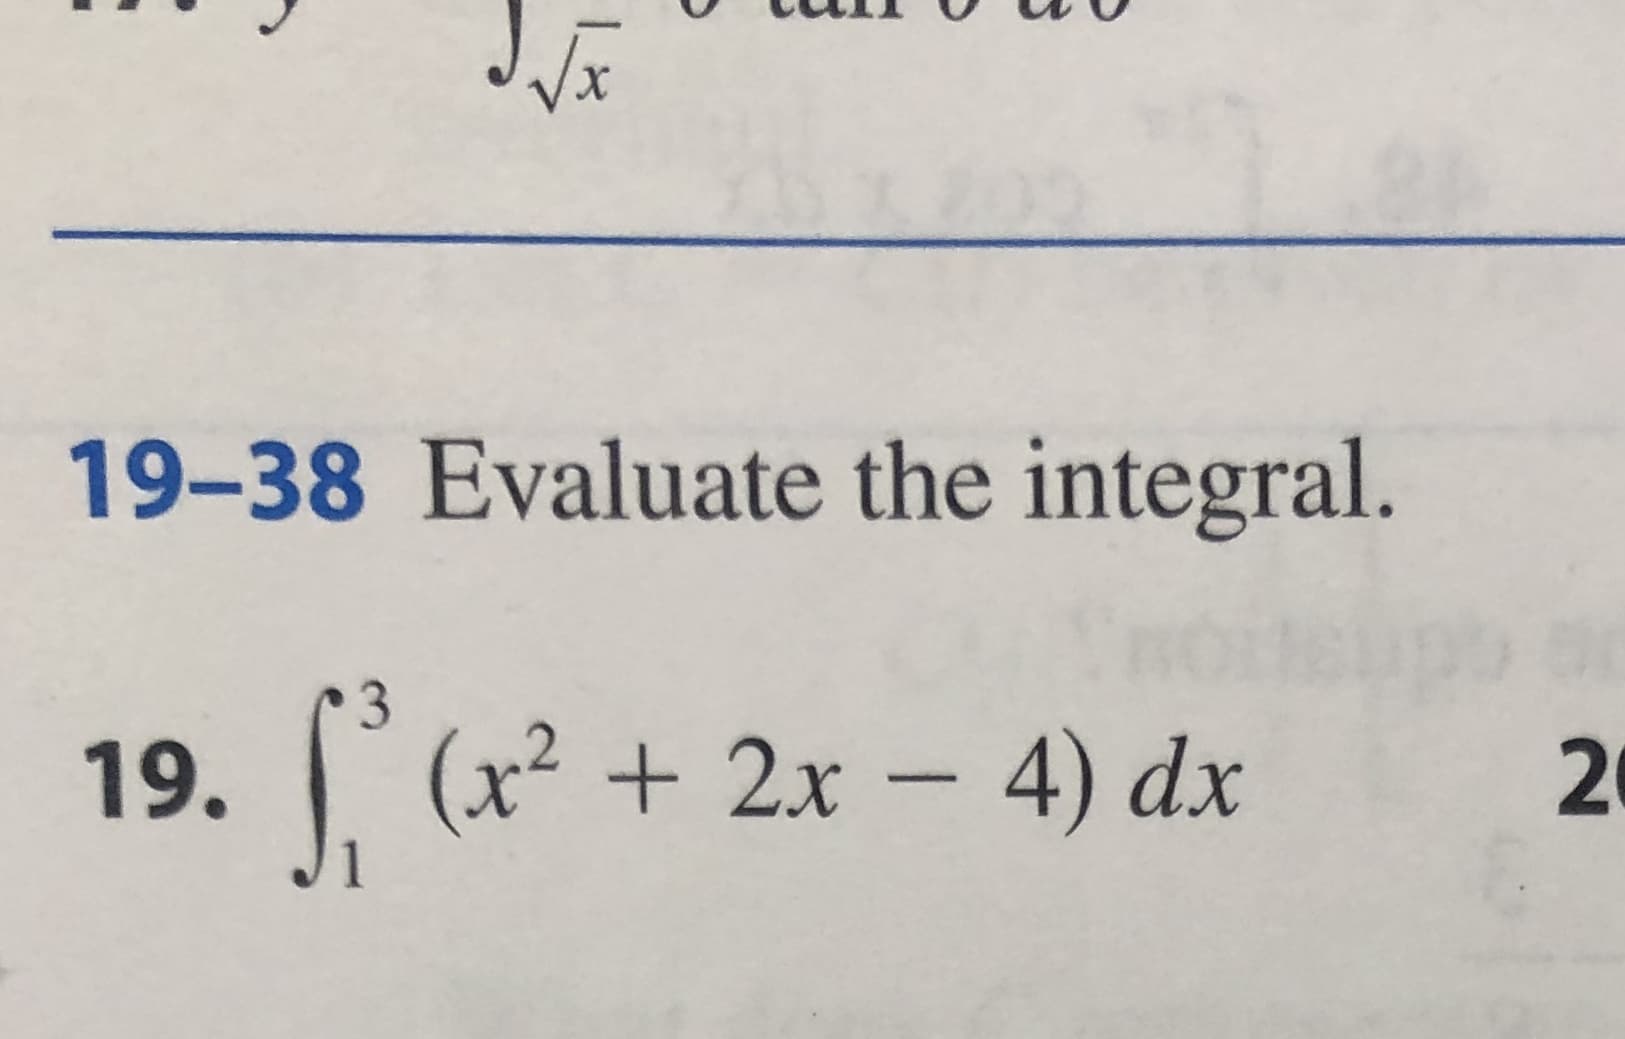 19-38 Evaluate the integral.
3
(x22x-4) dx
2
19.
